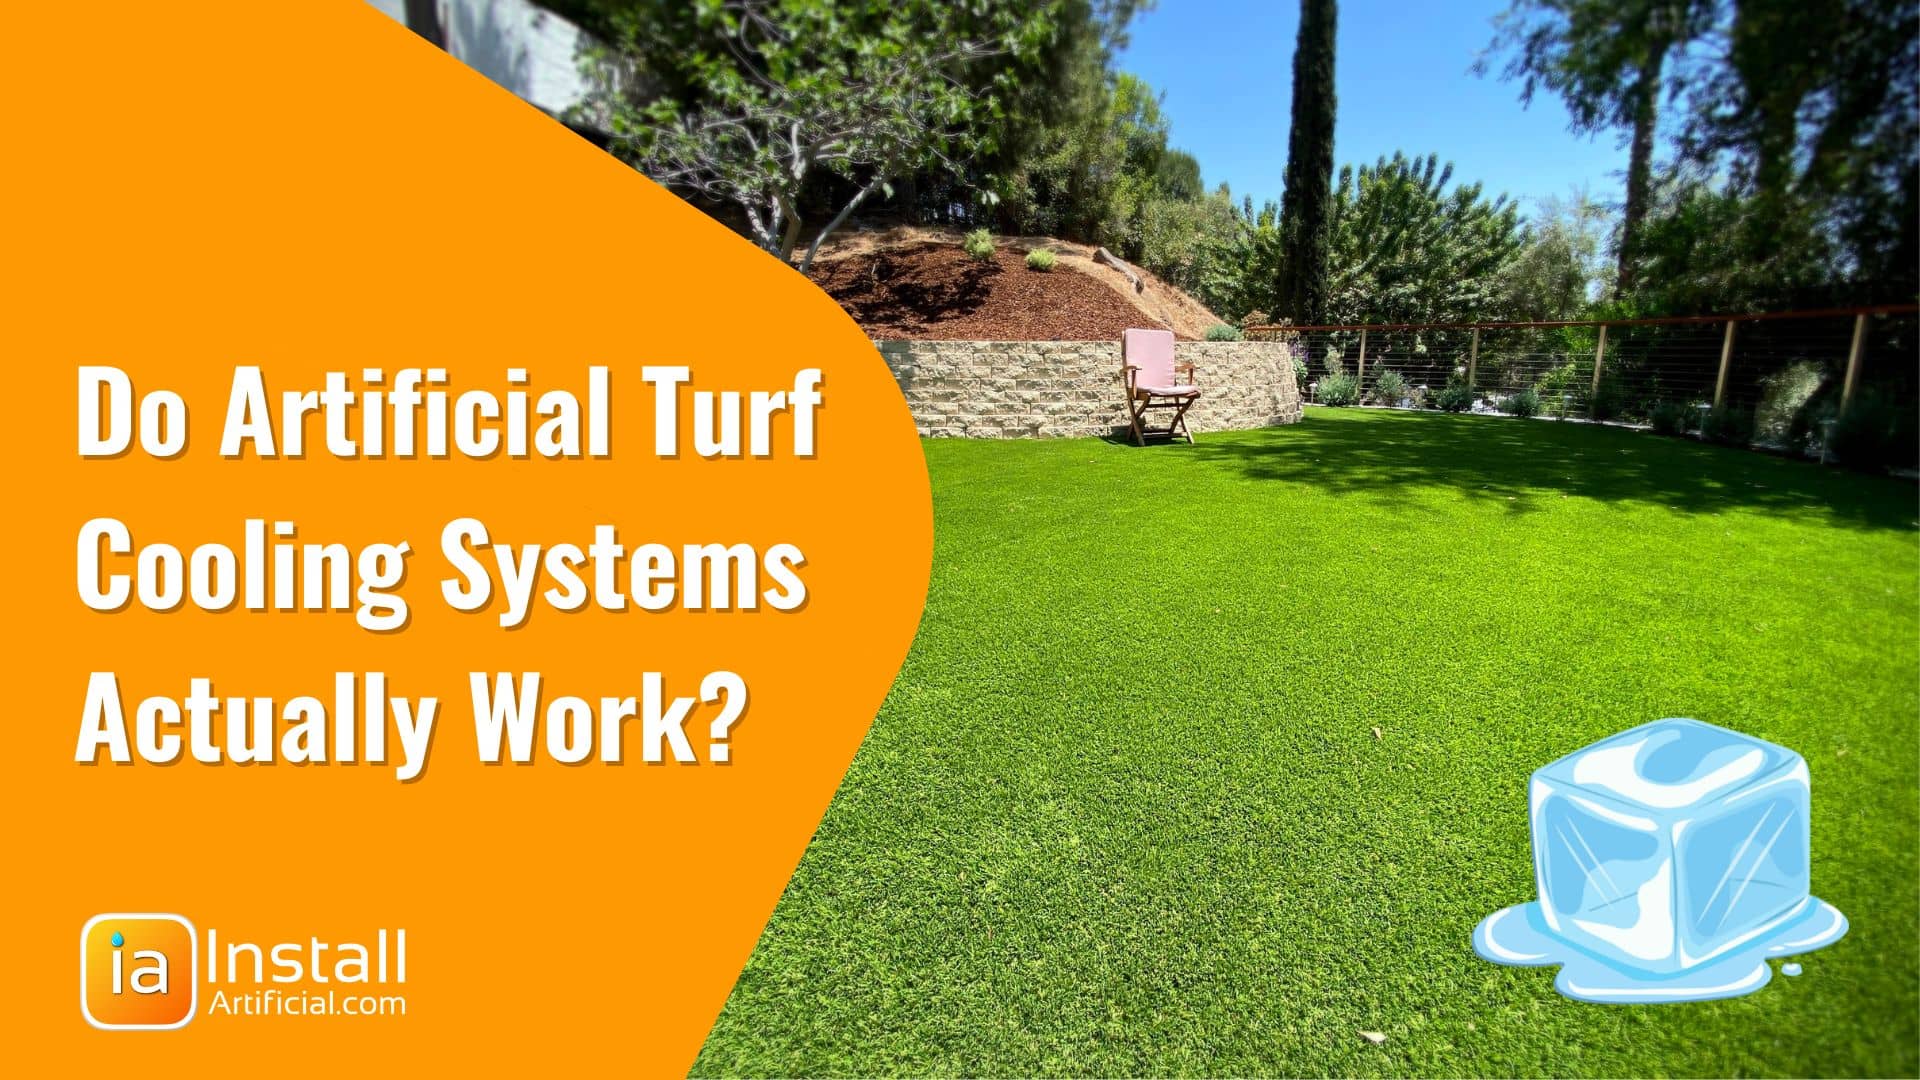 Do Artificial Turf Cooling Systems Really Work?